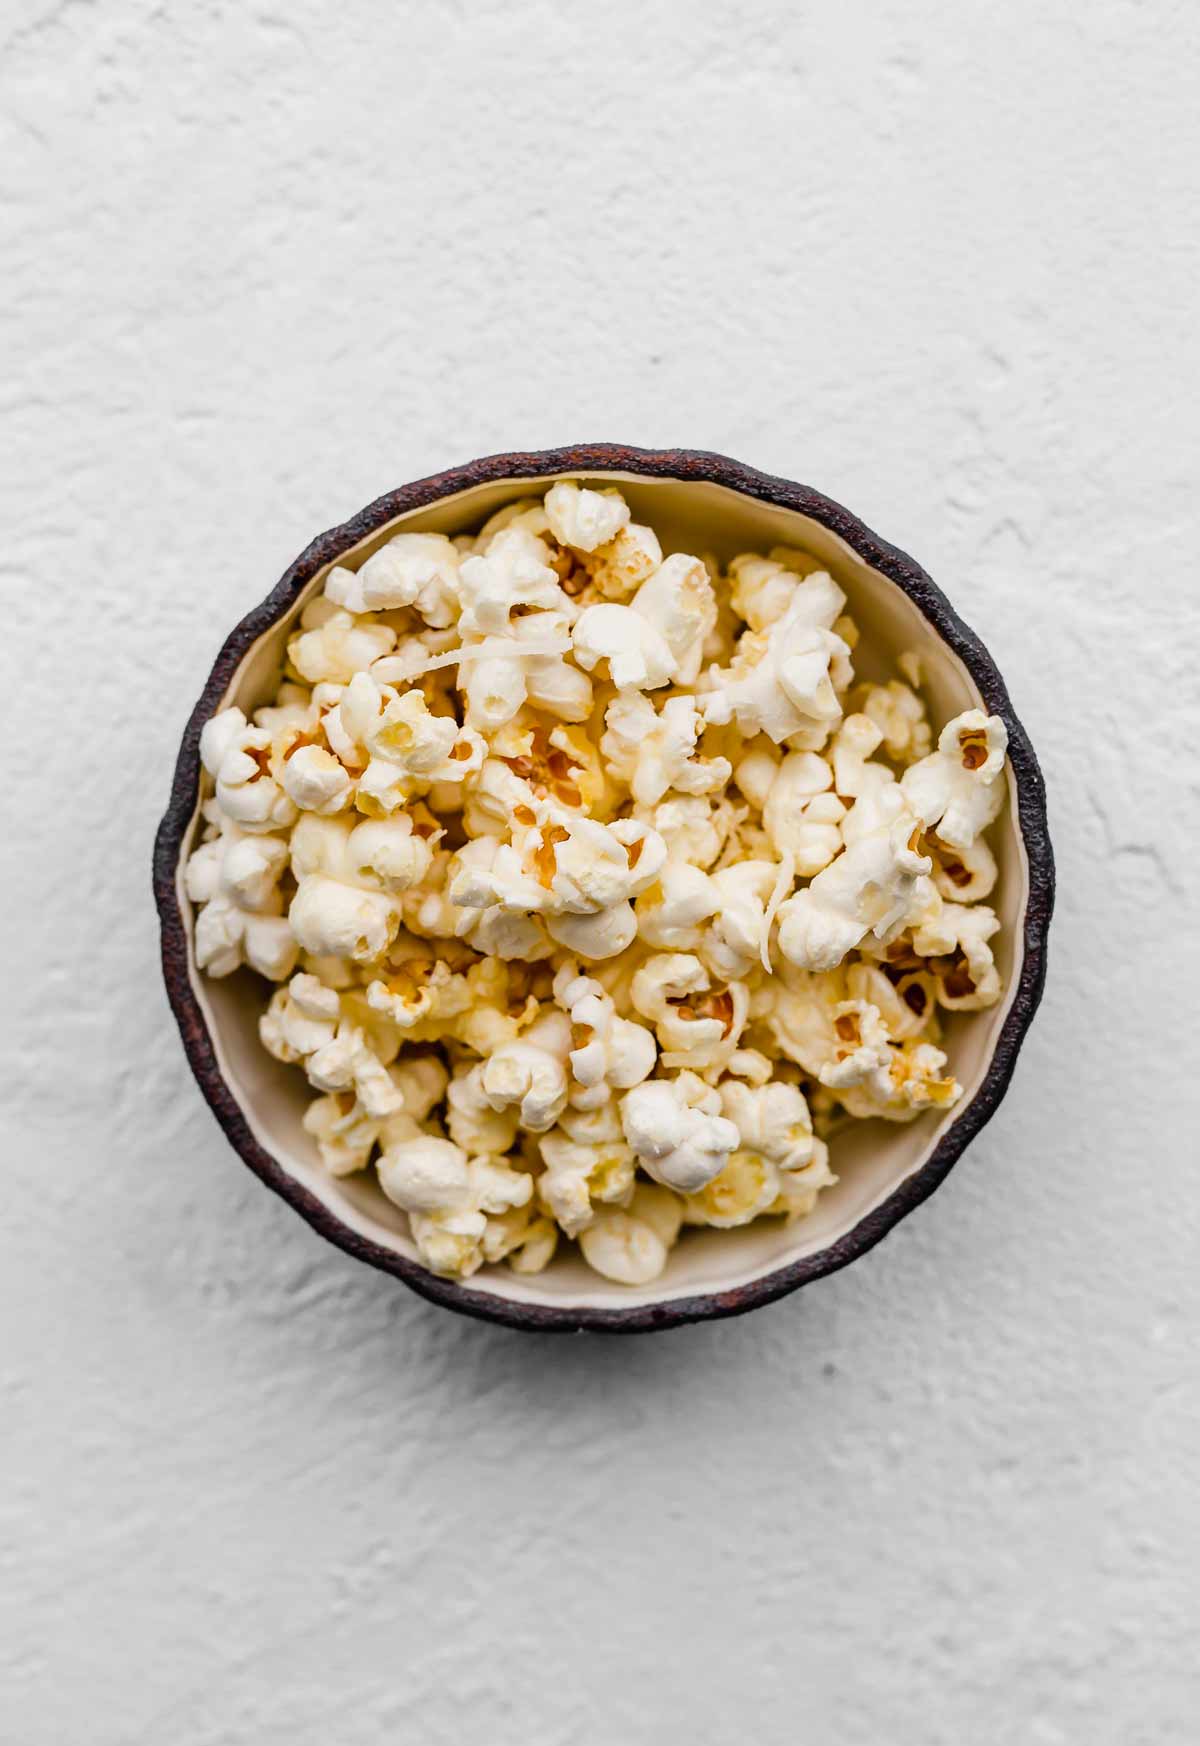 Parmesan Popcorn in a black bowl on a white textured background.